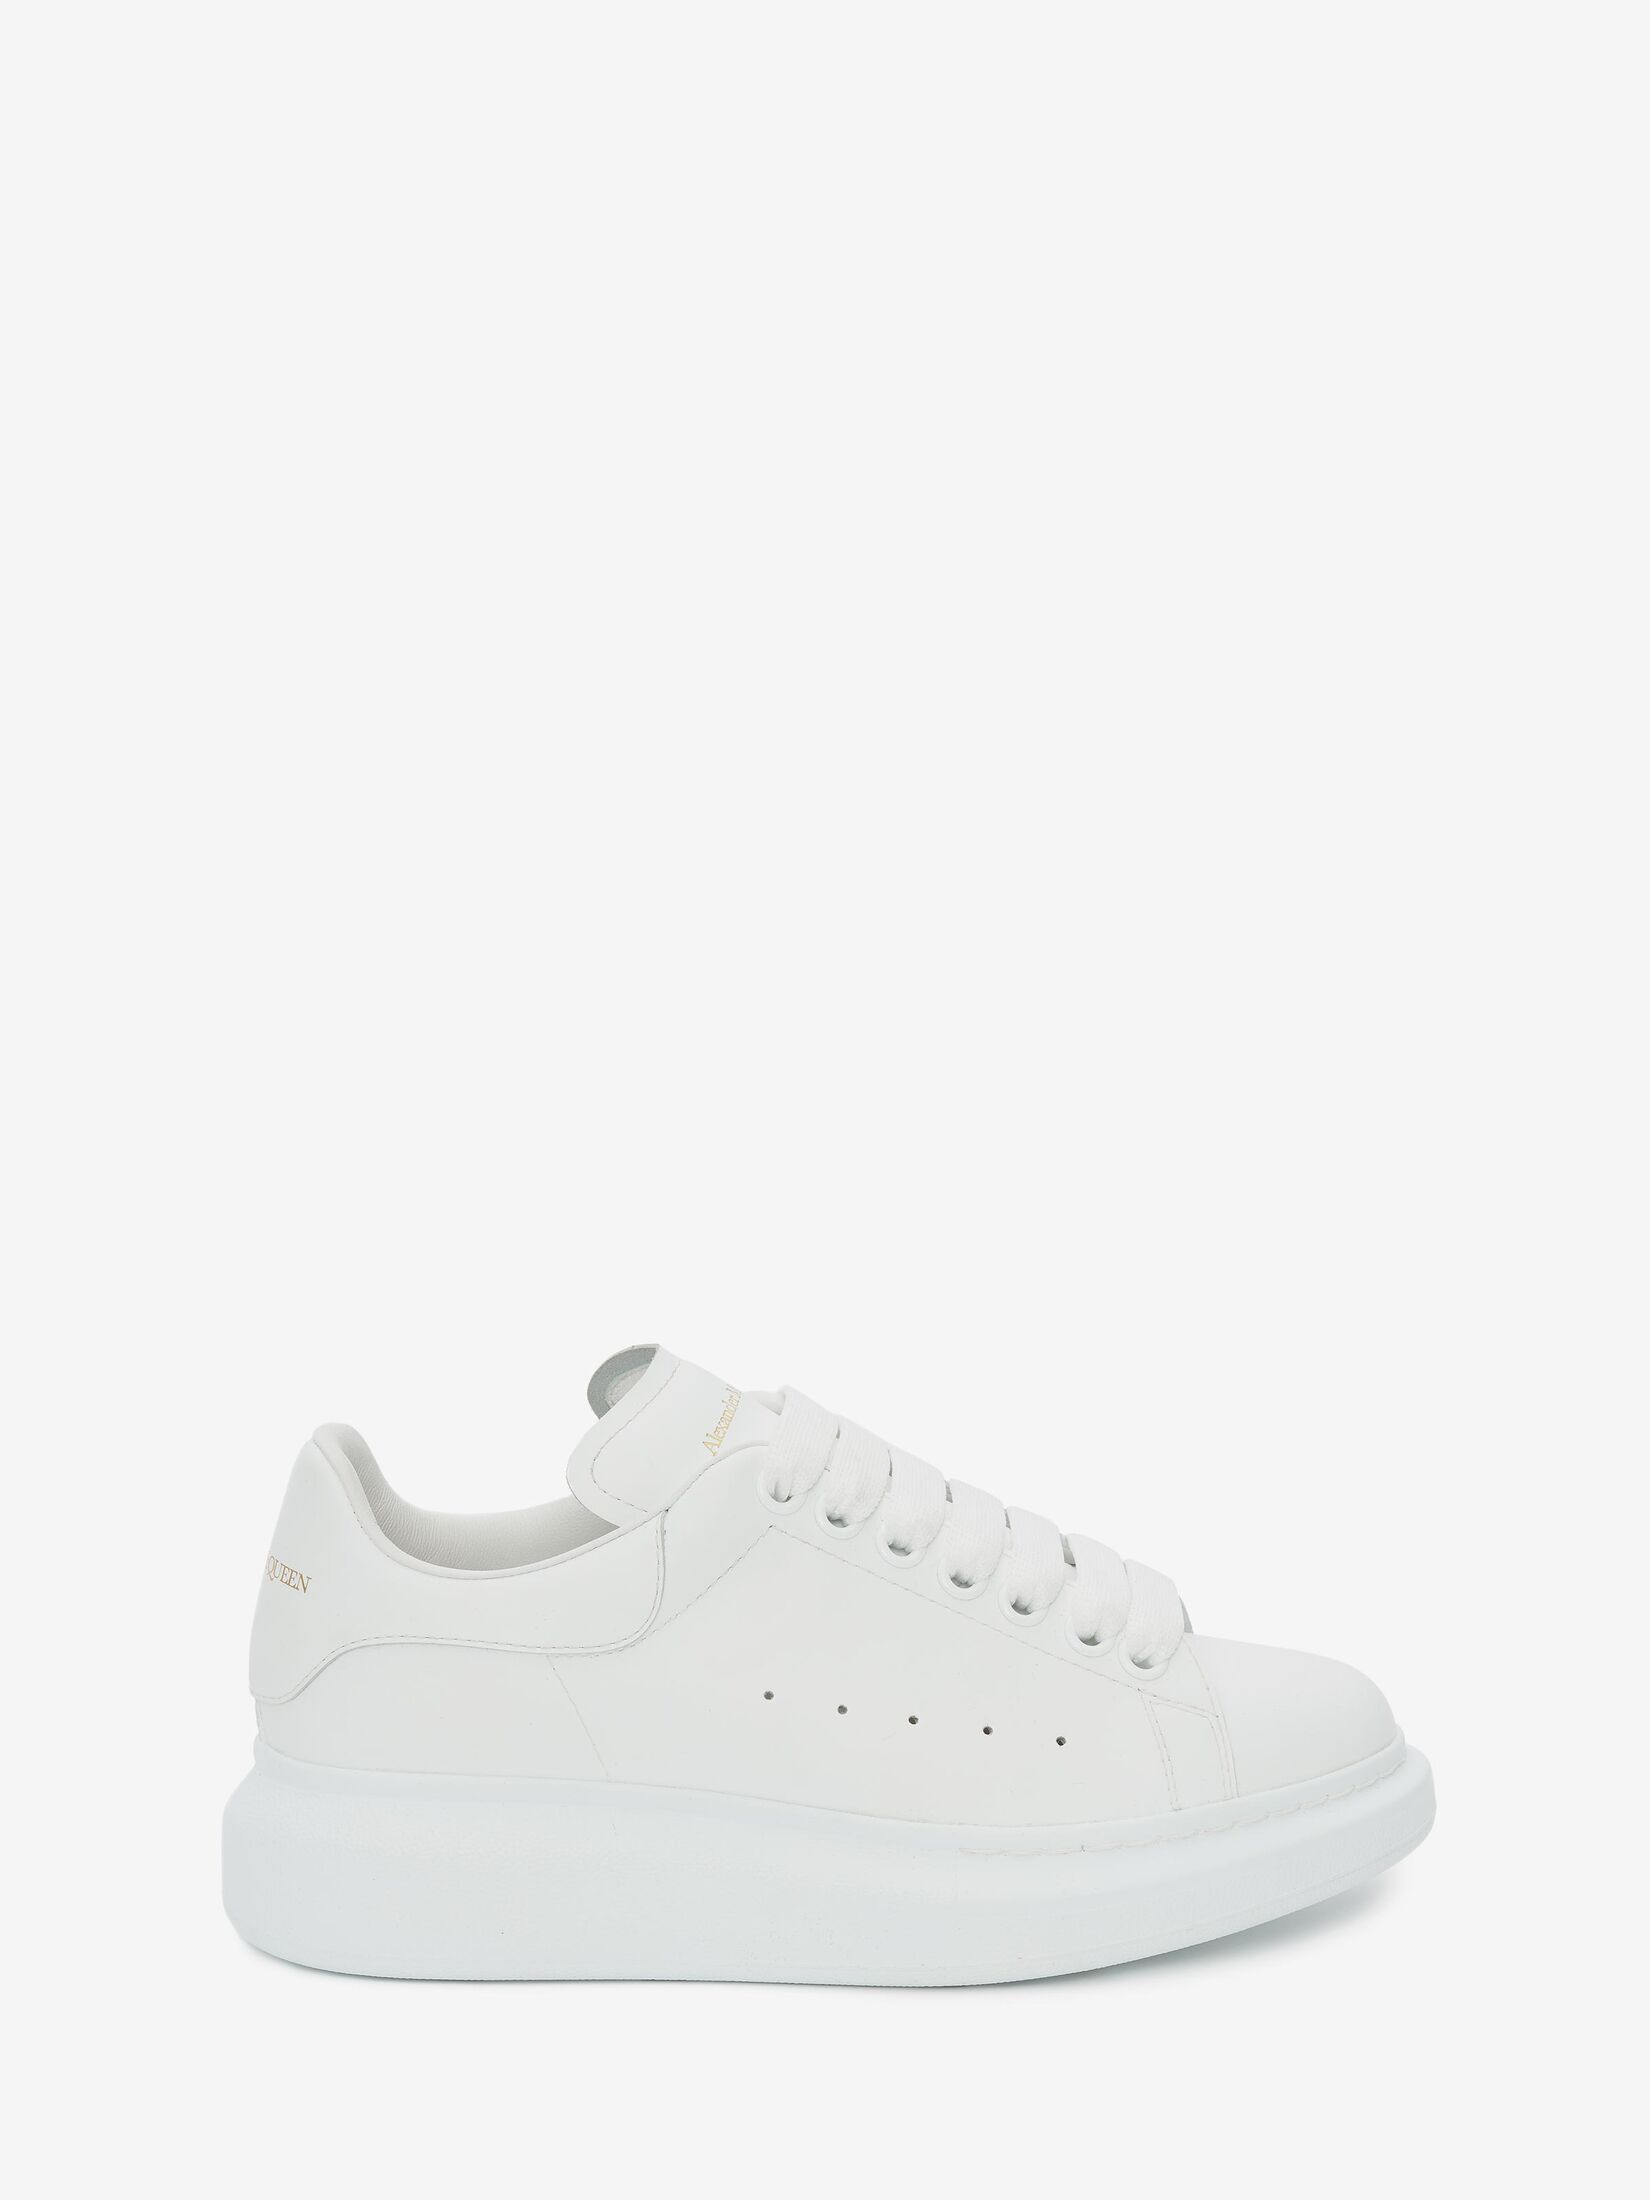 Buy U.S. Polo Assn. Panelled Colour Block Clanal Sneakers - NNNOW.com